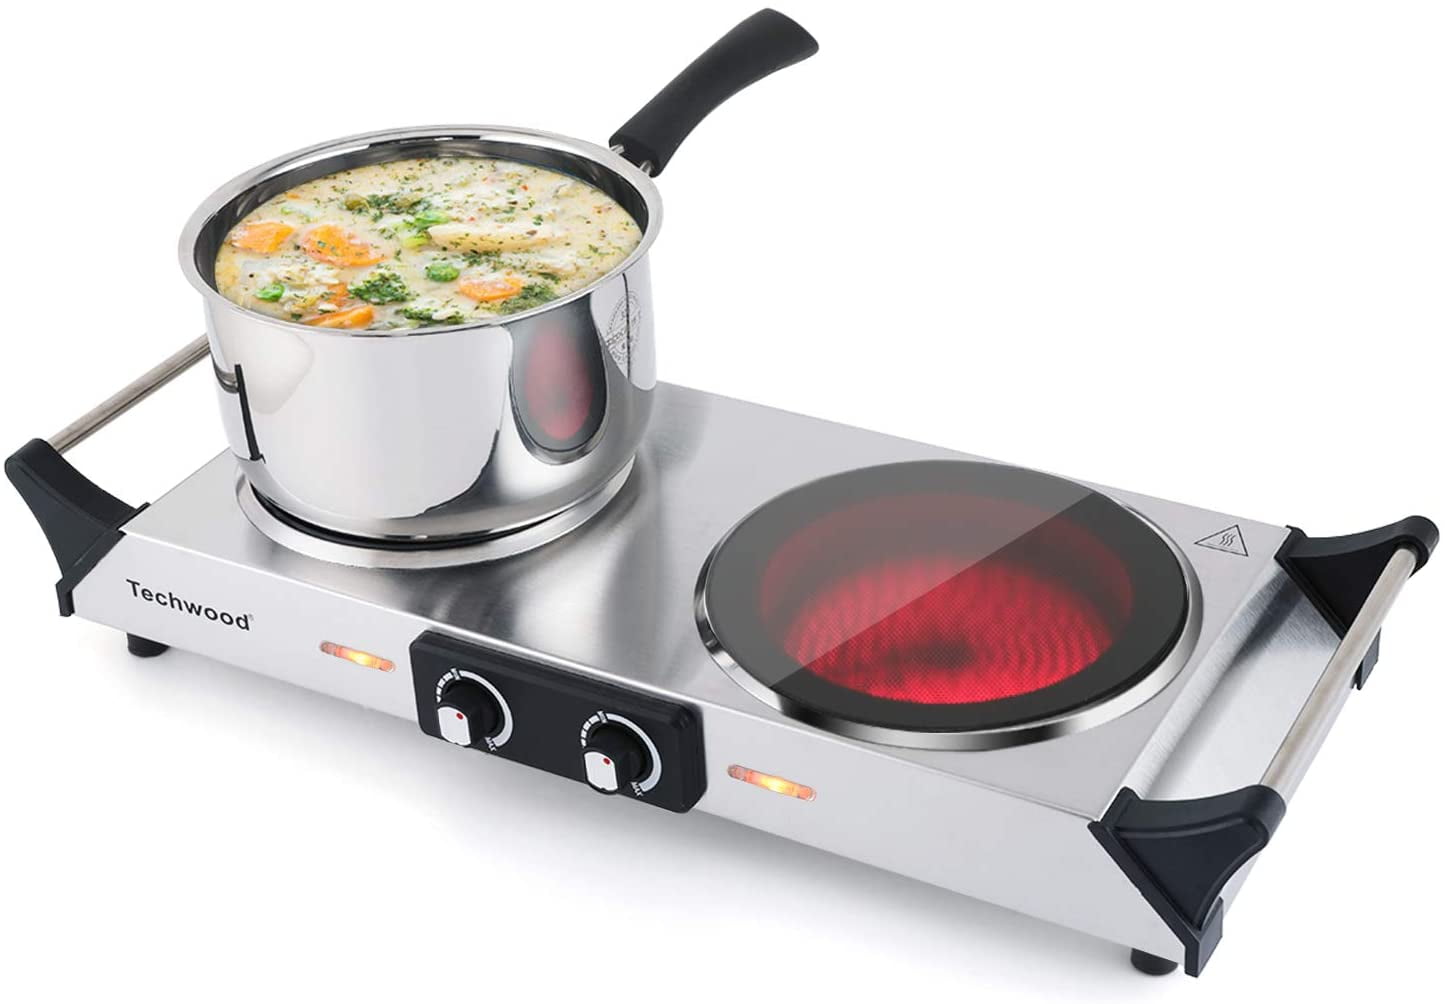 Techwood Hot Plate Portable Electric Stove 1800W Countertop Infrared  Ceramic Double Burner with Adjustable Temperature & Stay Cool Handles, 